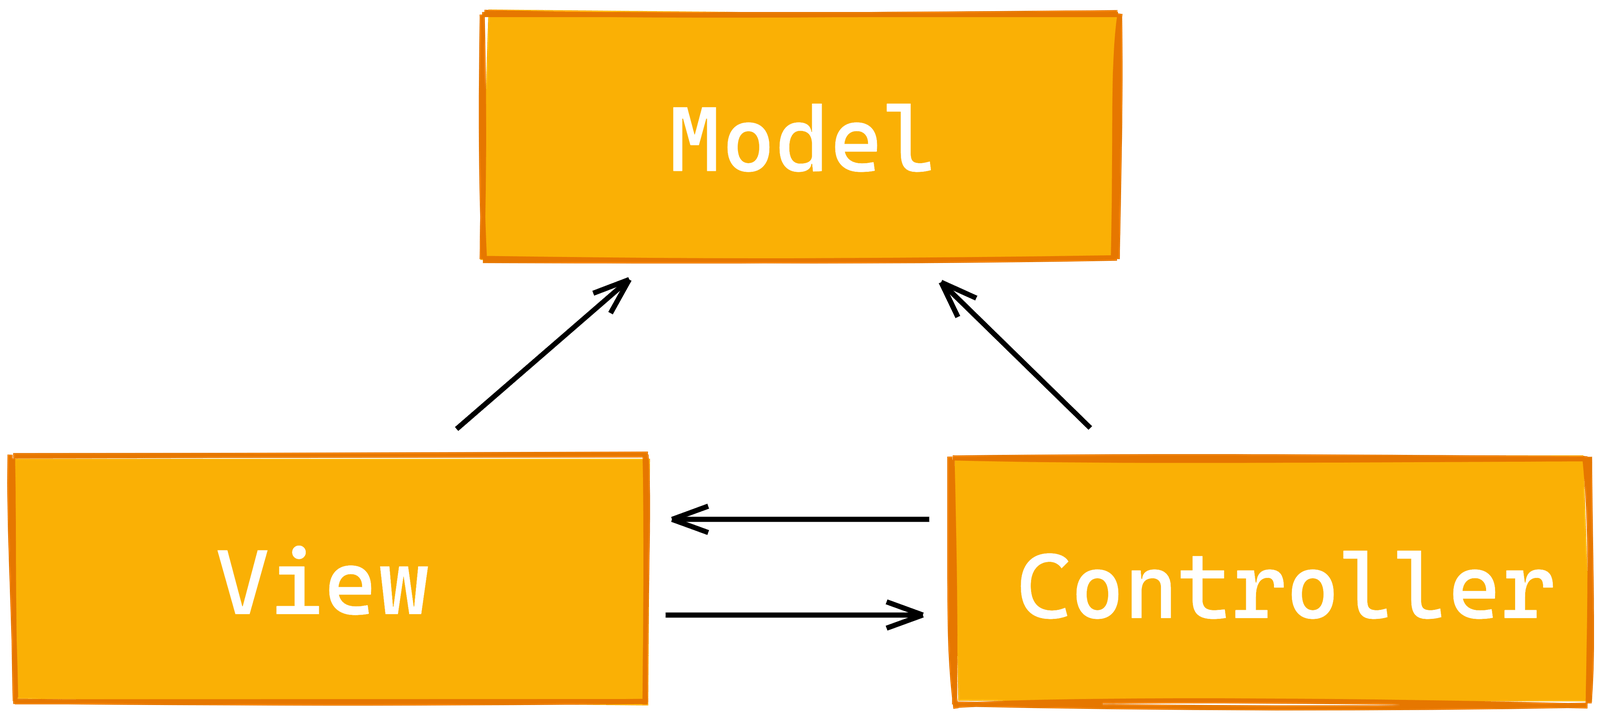 View points to Model and to Controller. Controller points to View and Model.